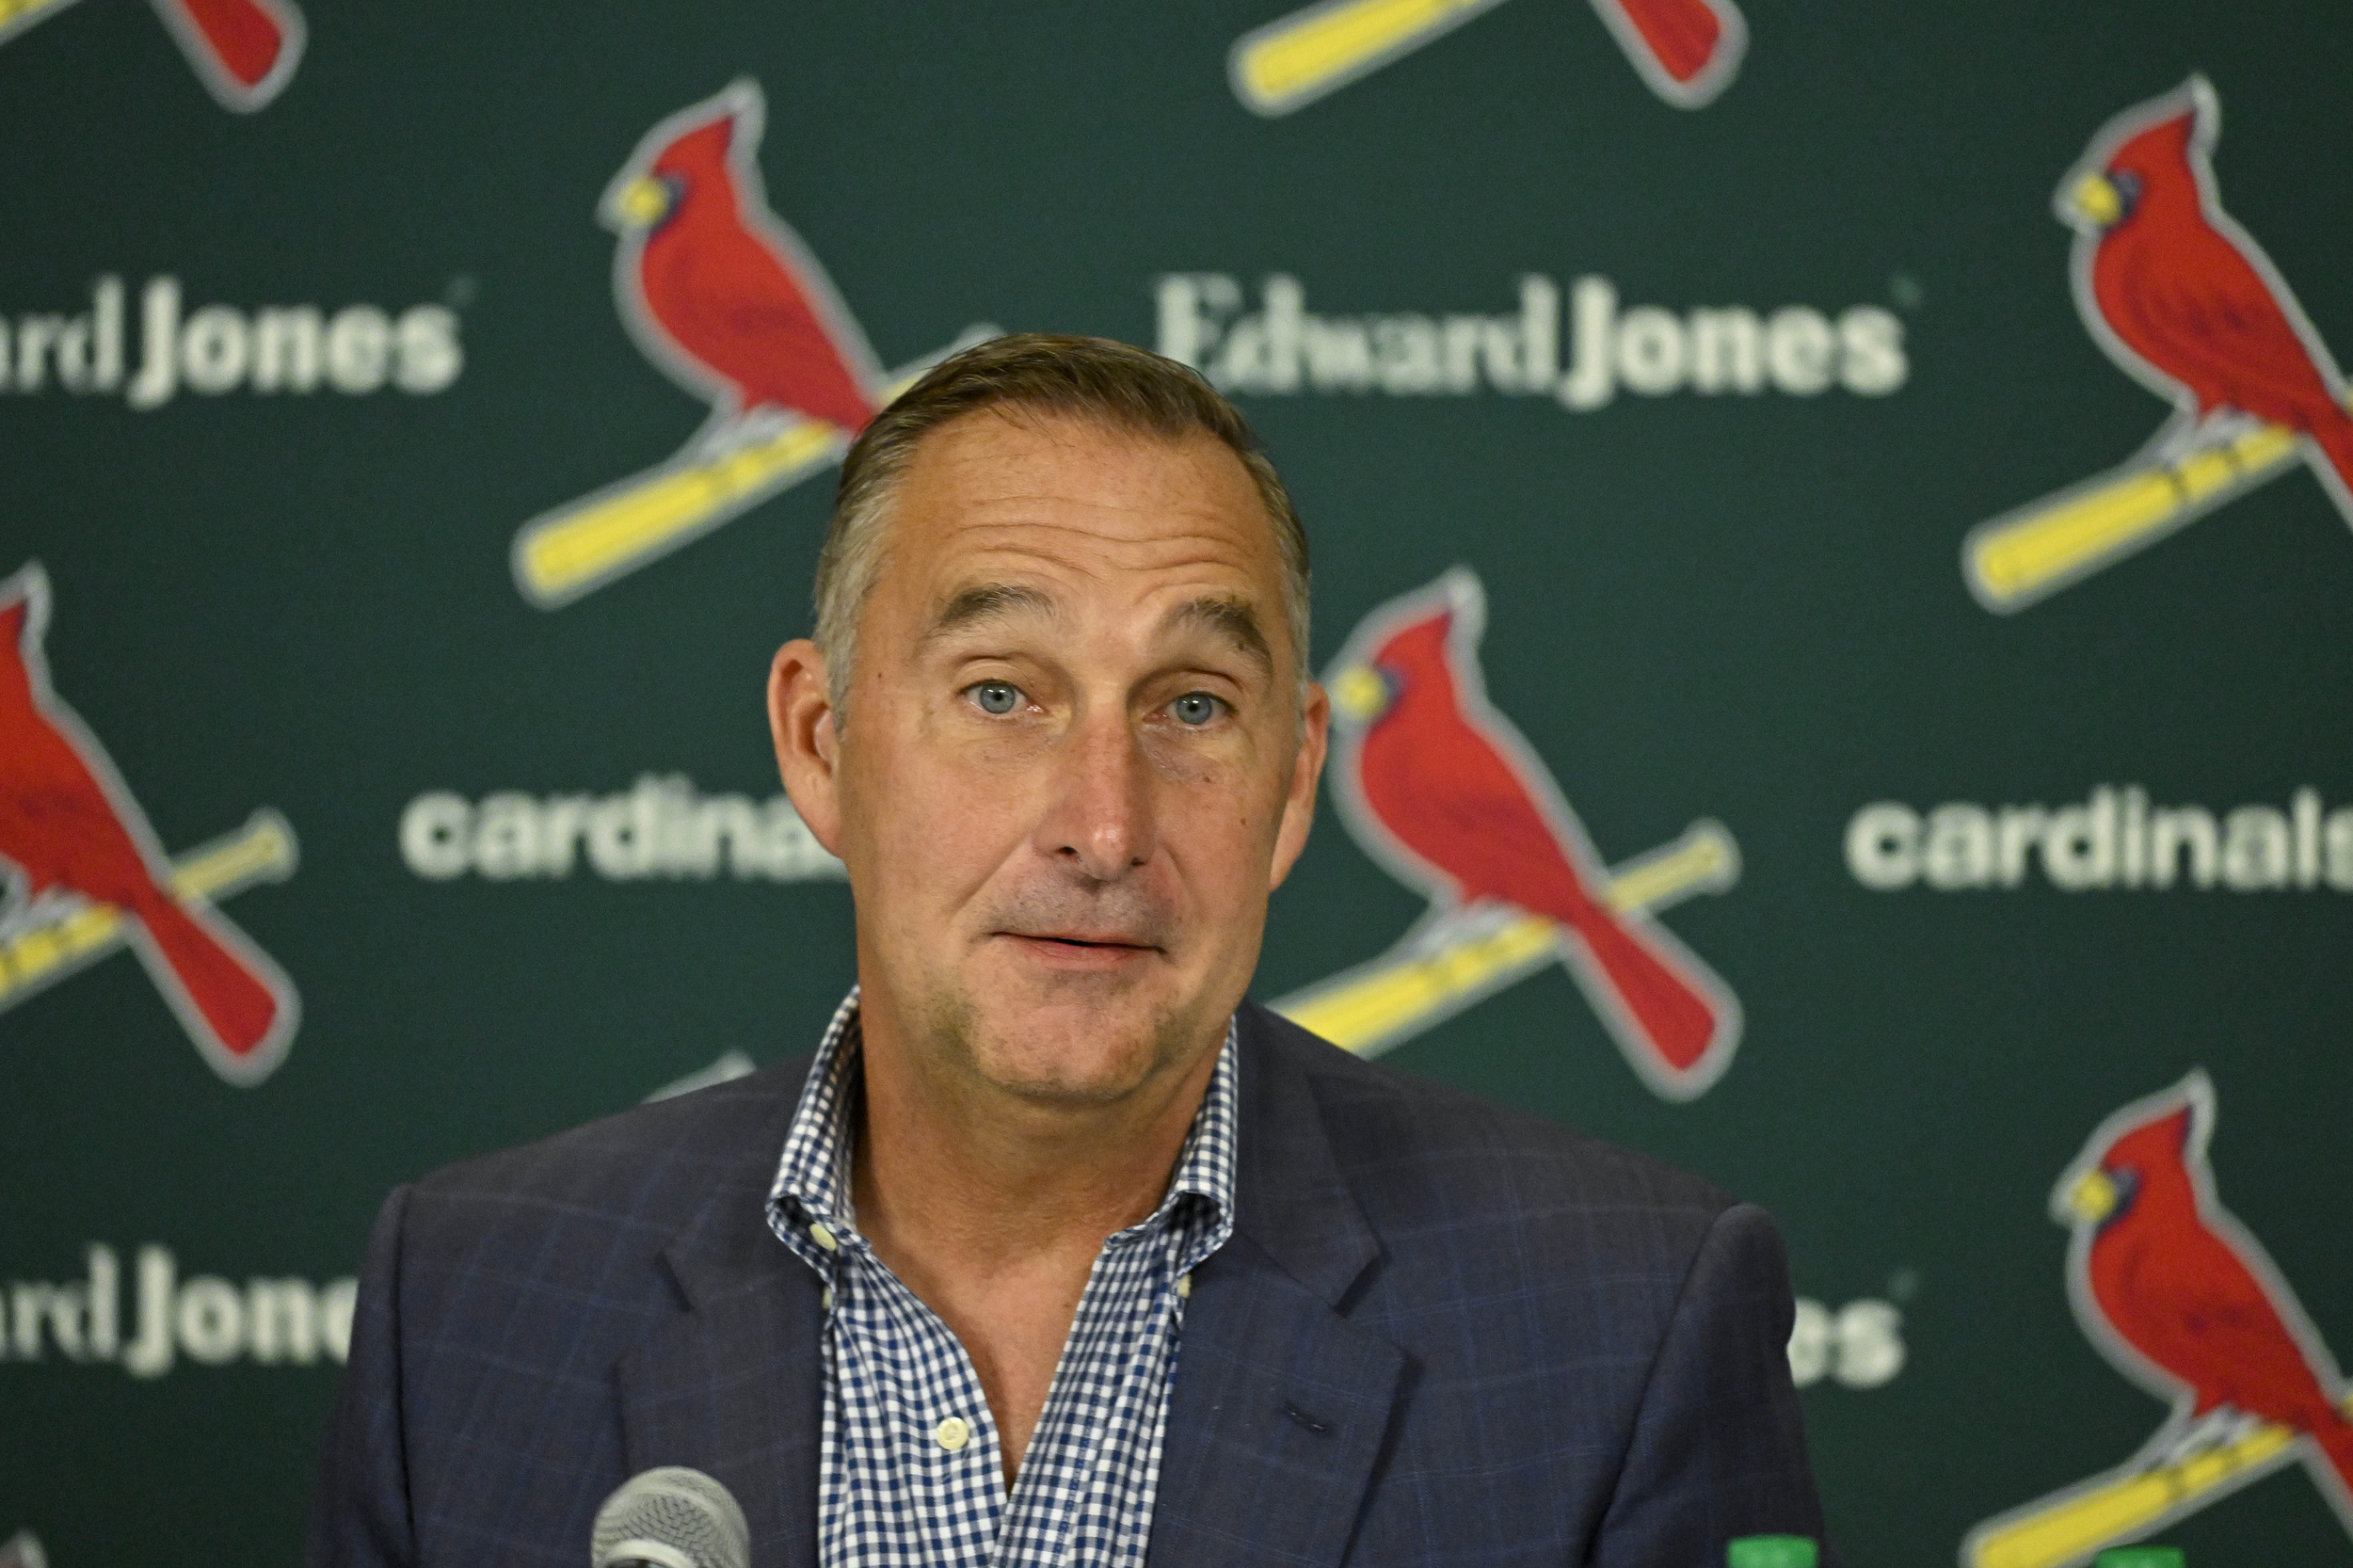 cardinals expect to add bullpen help via free agency